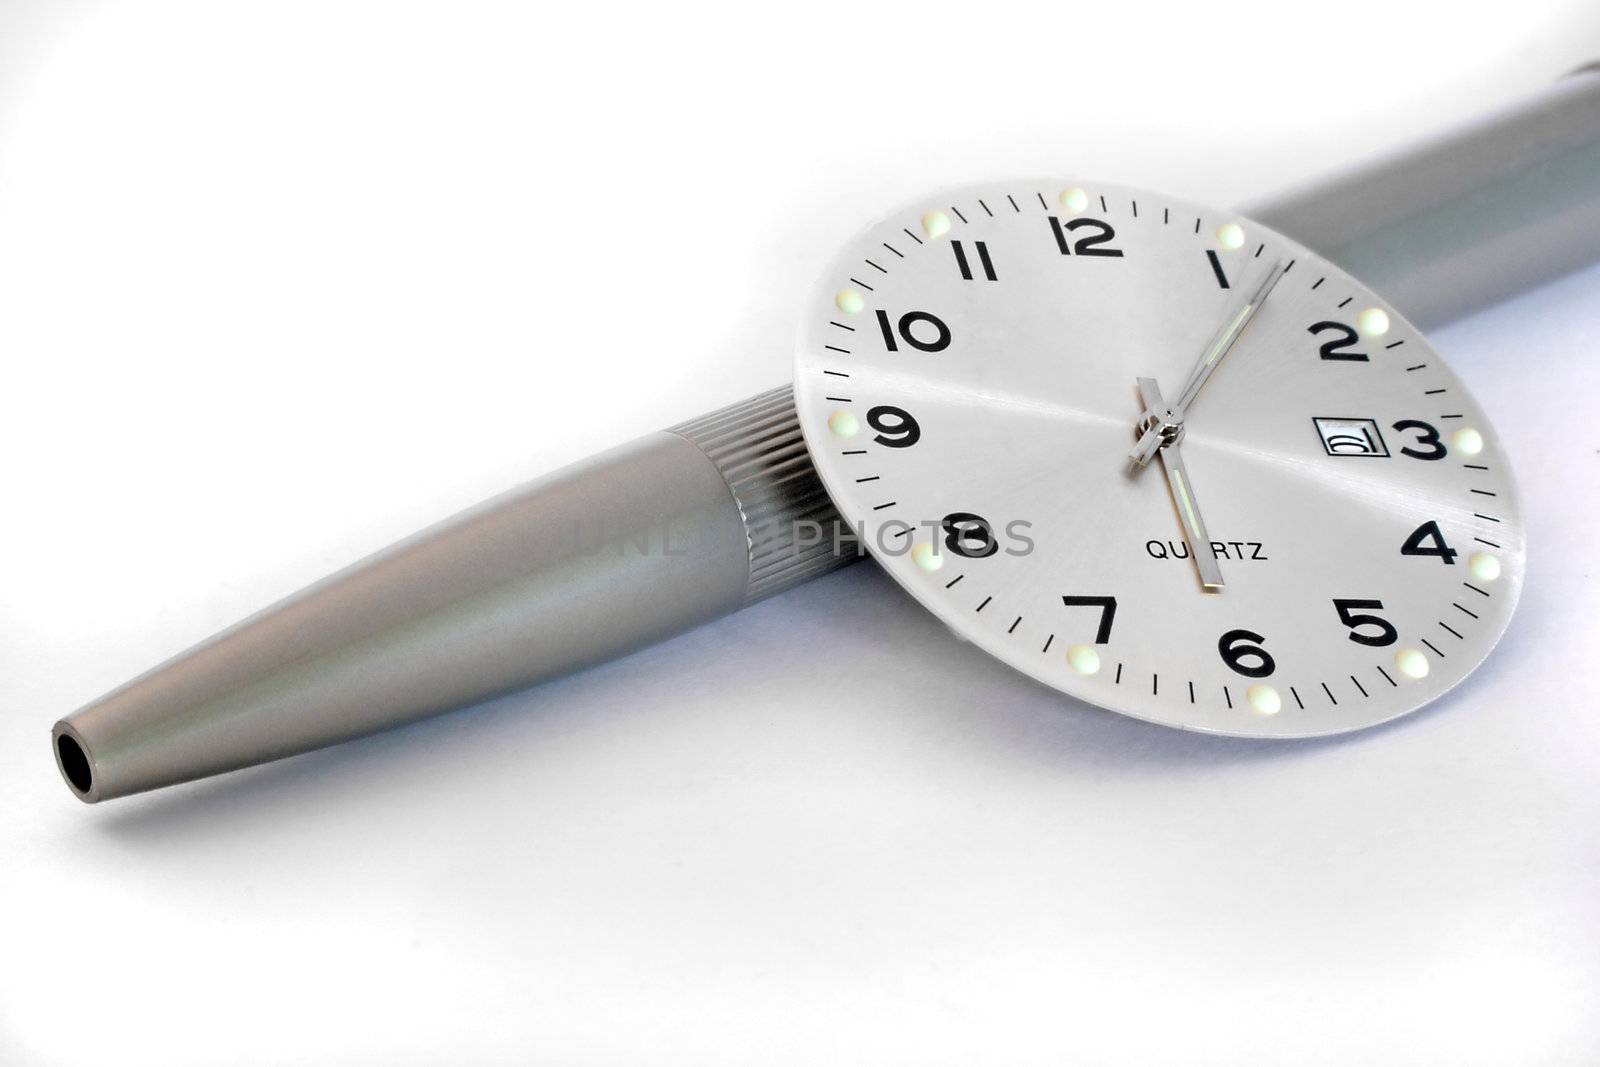 A close up of a clock face resting on an off-focus pen.